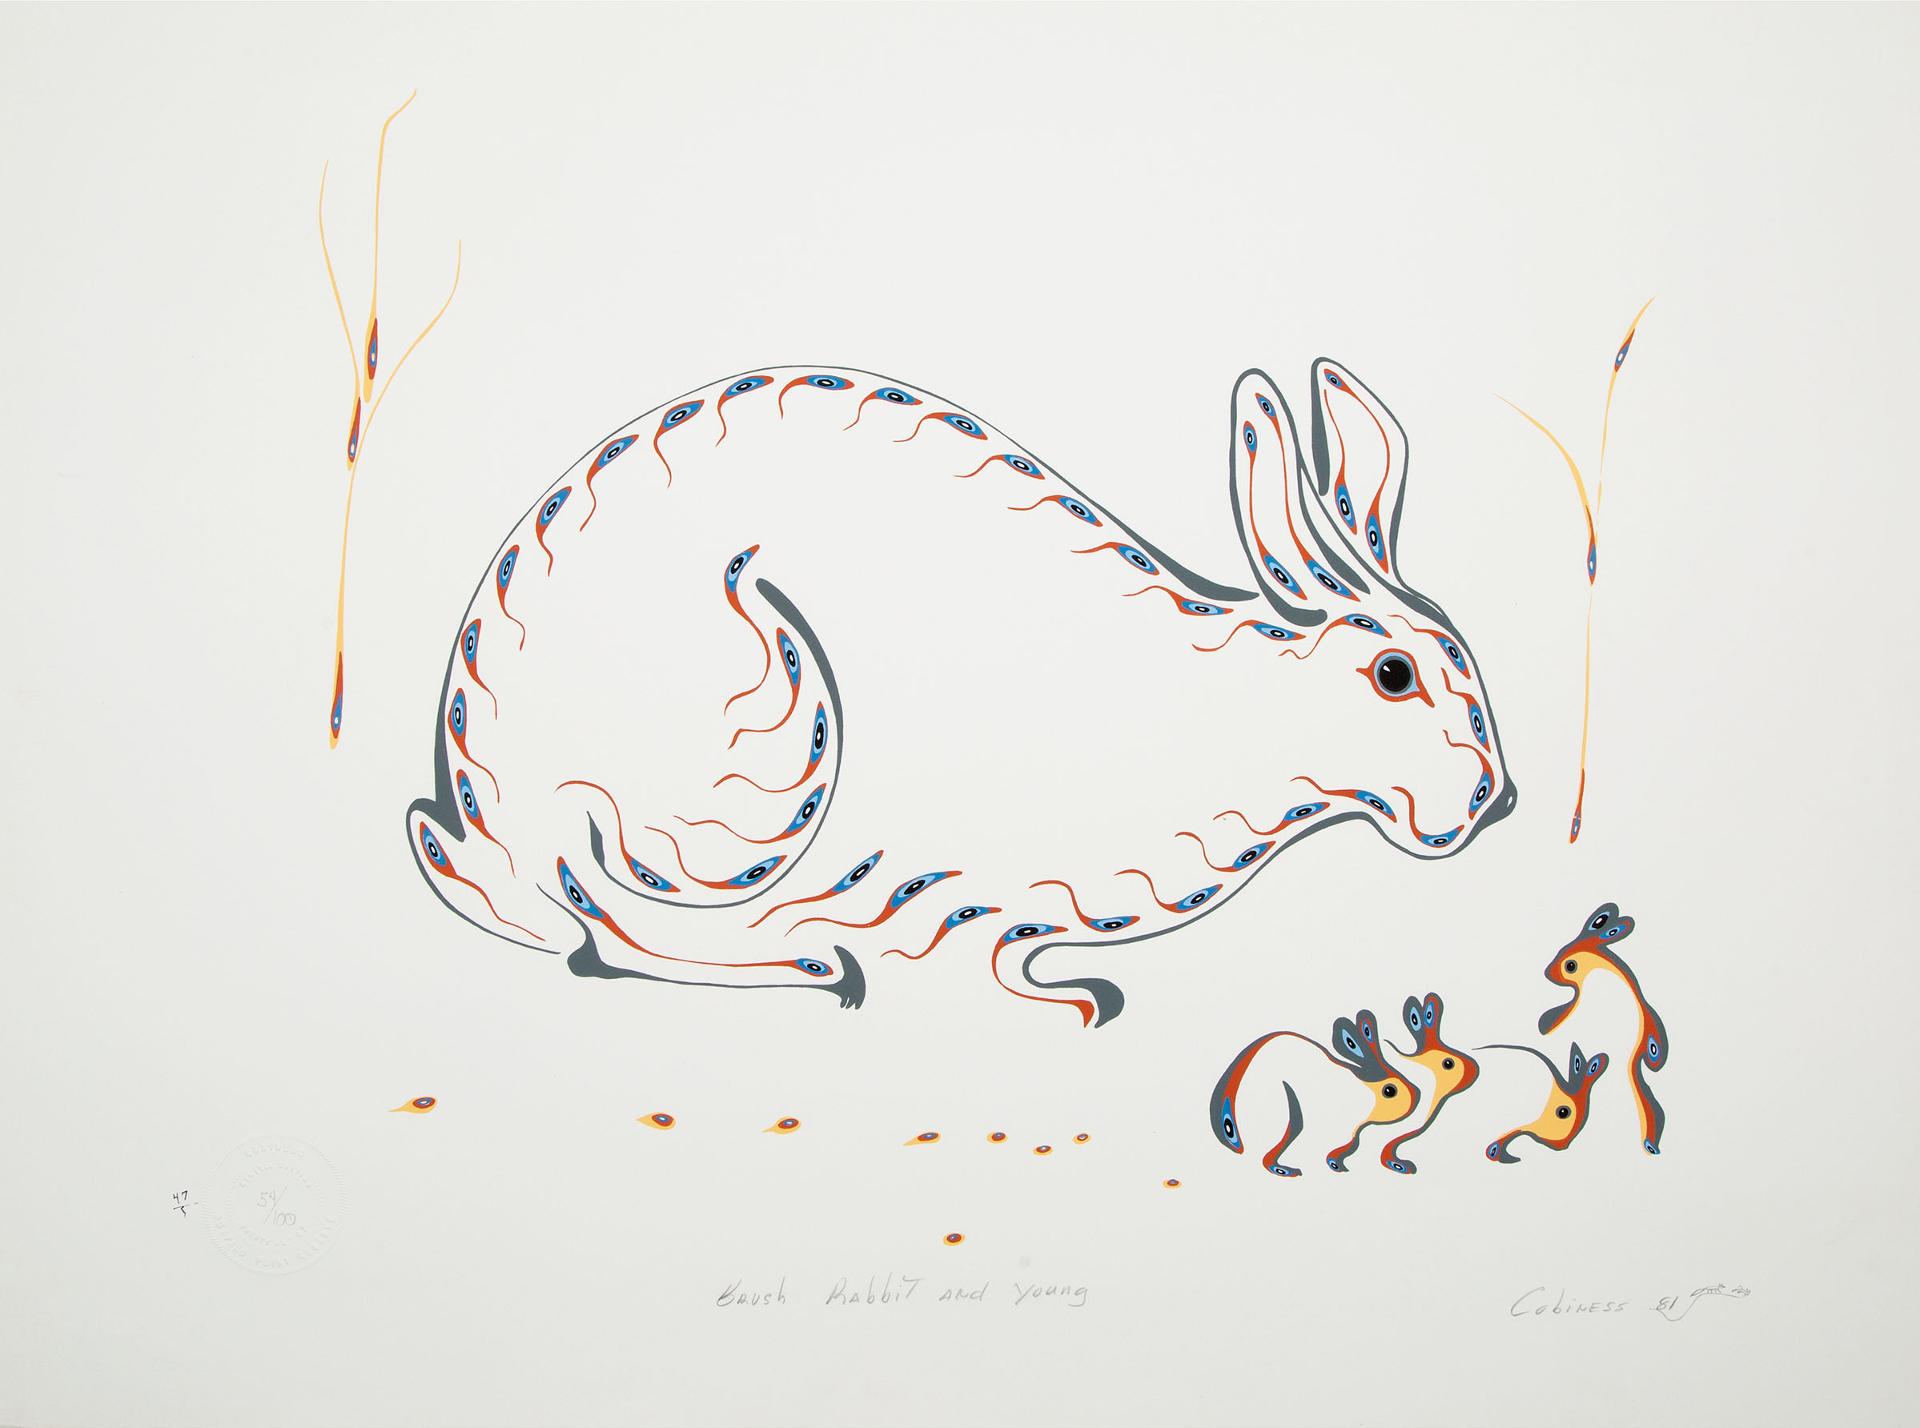 Eddy Cobiness (1933-1996) - Brush Rabbit And Young